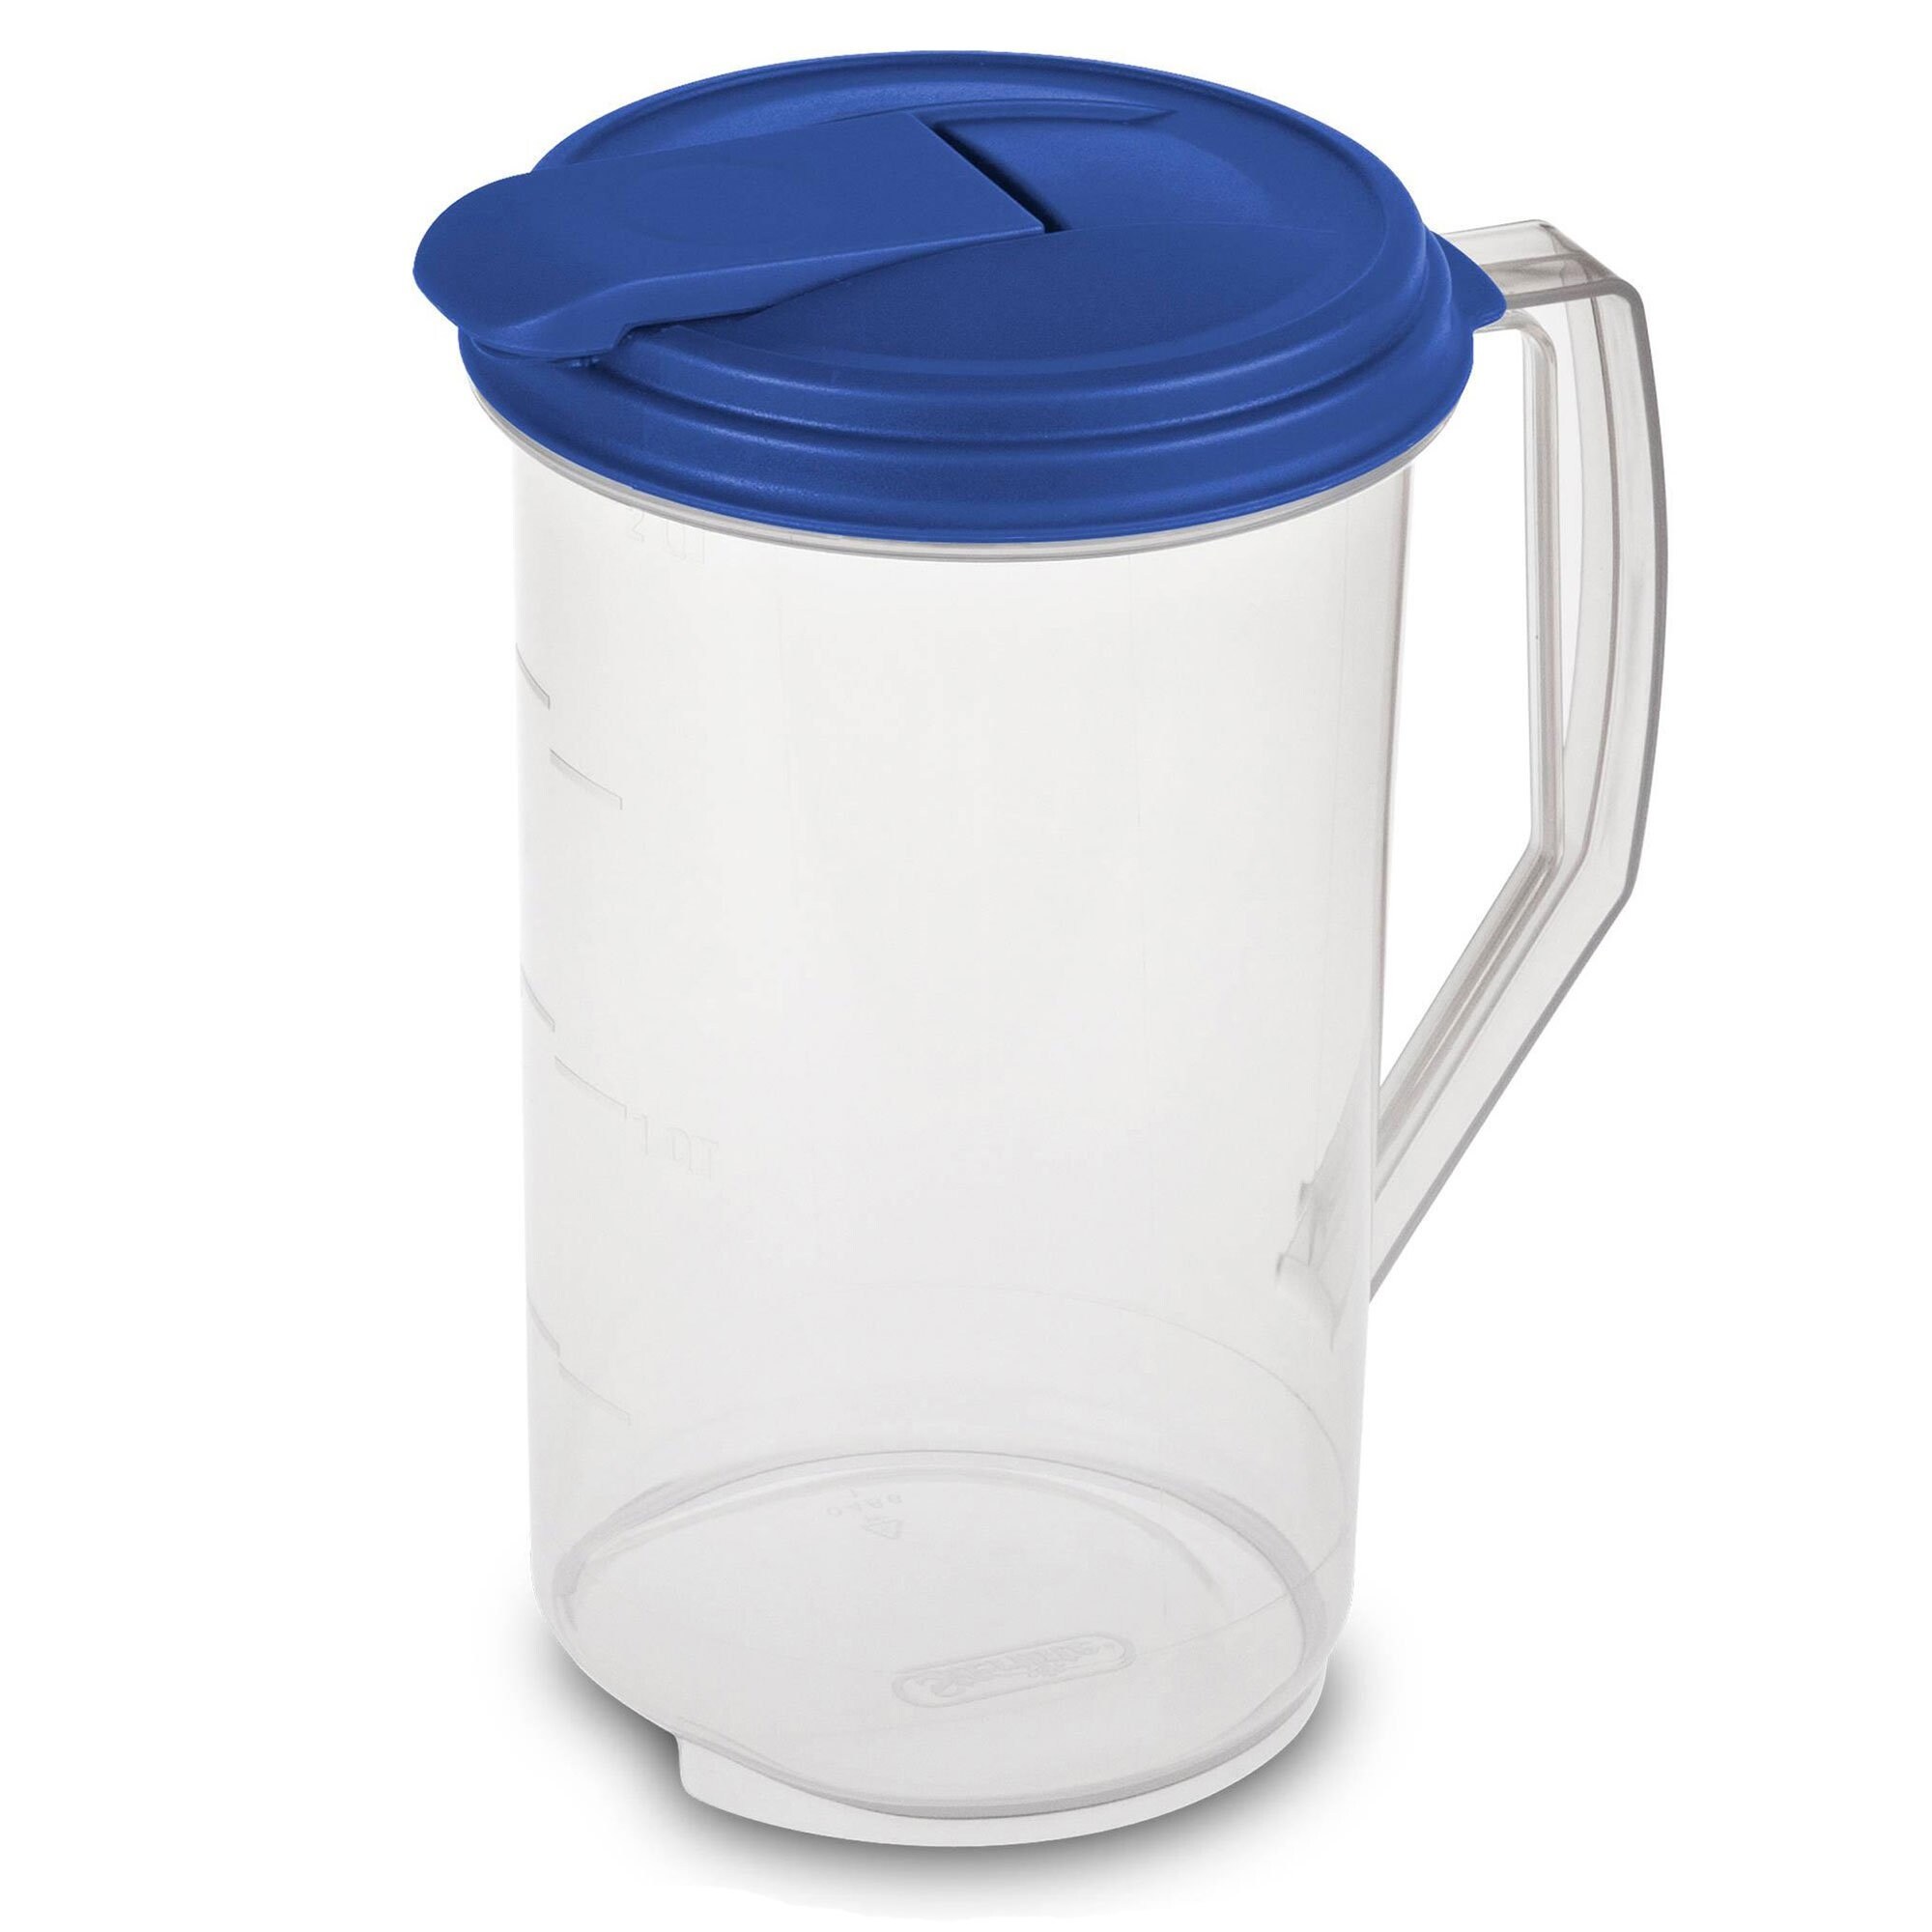 https://ak1.ostkcdn.com/images/products/is/images/direct/425e09be2c486a1070c05e48a1f8aed9481e406e/Sterilite-2-Qt-Clear-Plastic-Drink-Pitcher-with-Leak-Proof-Lid%2C-Blue-%2818-Pack%29.jpg